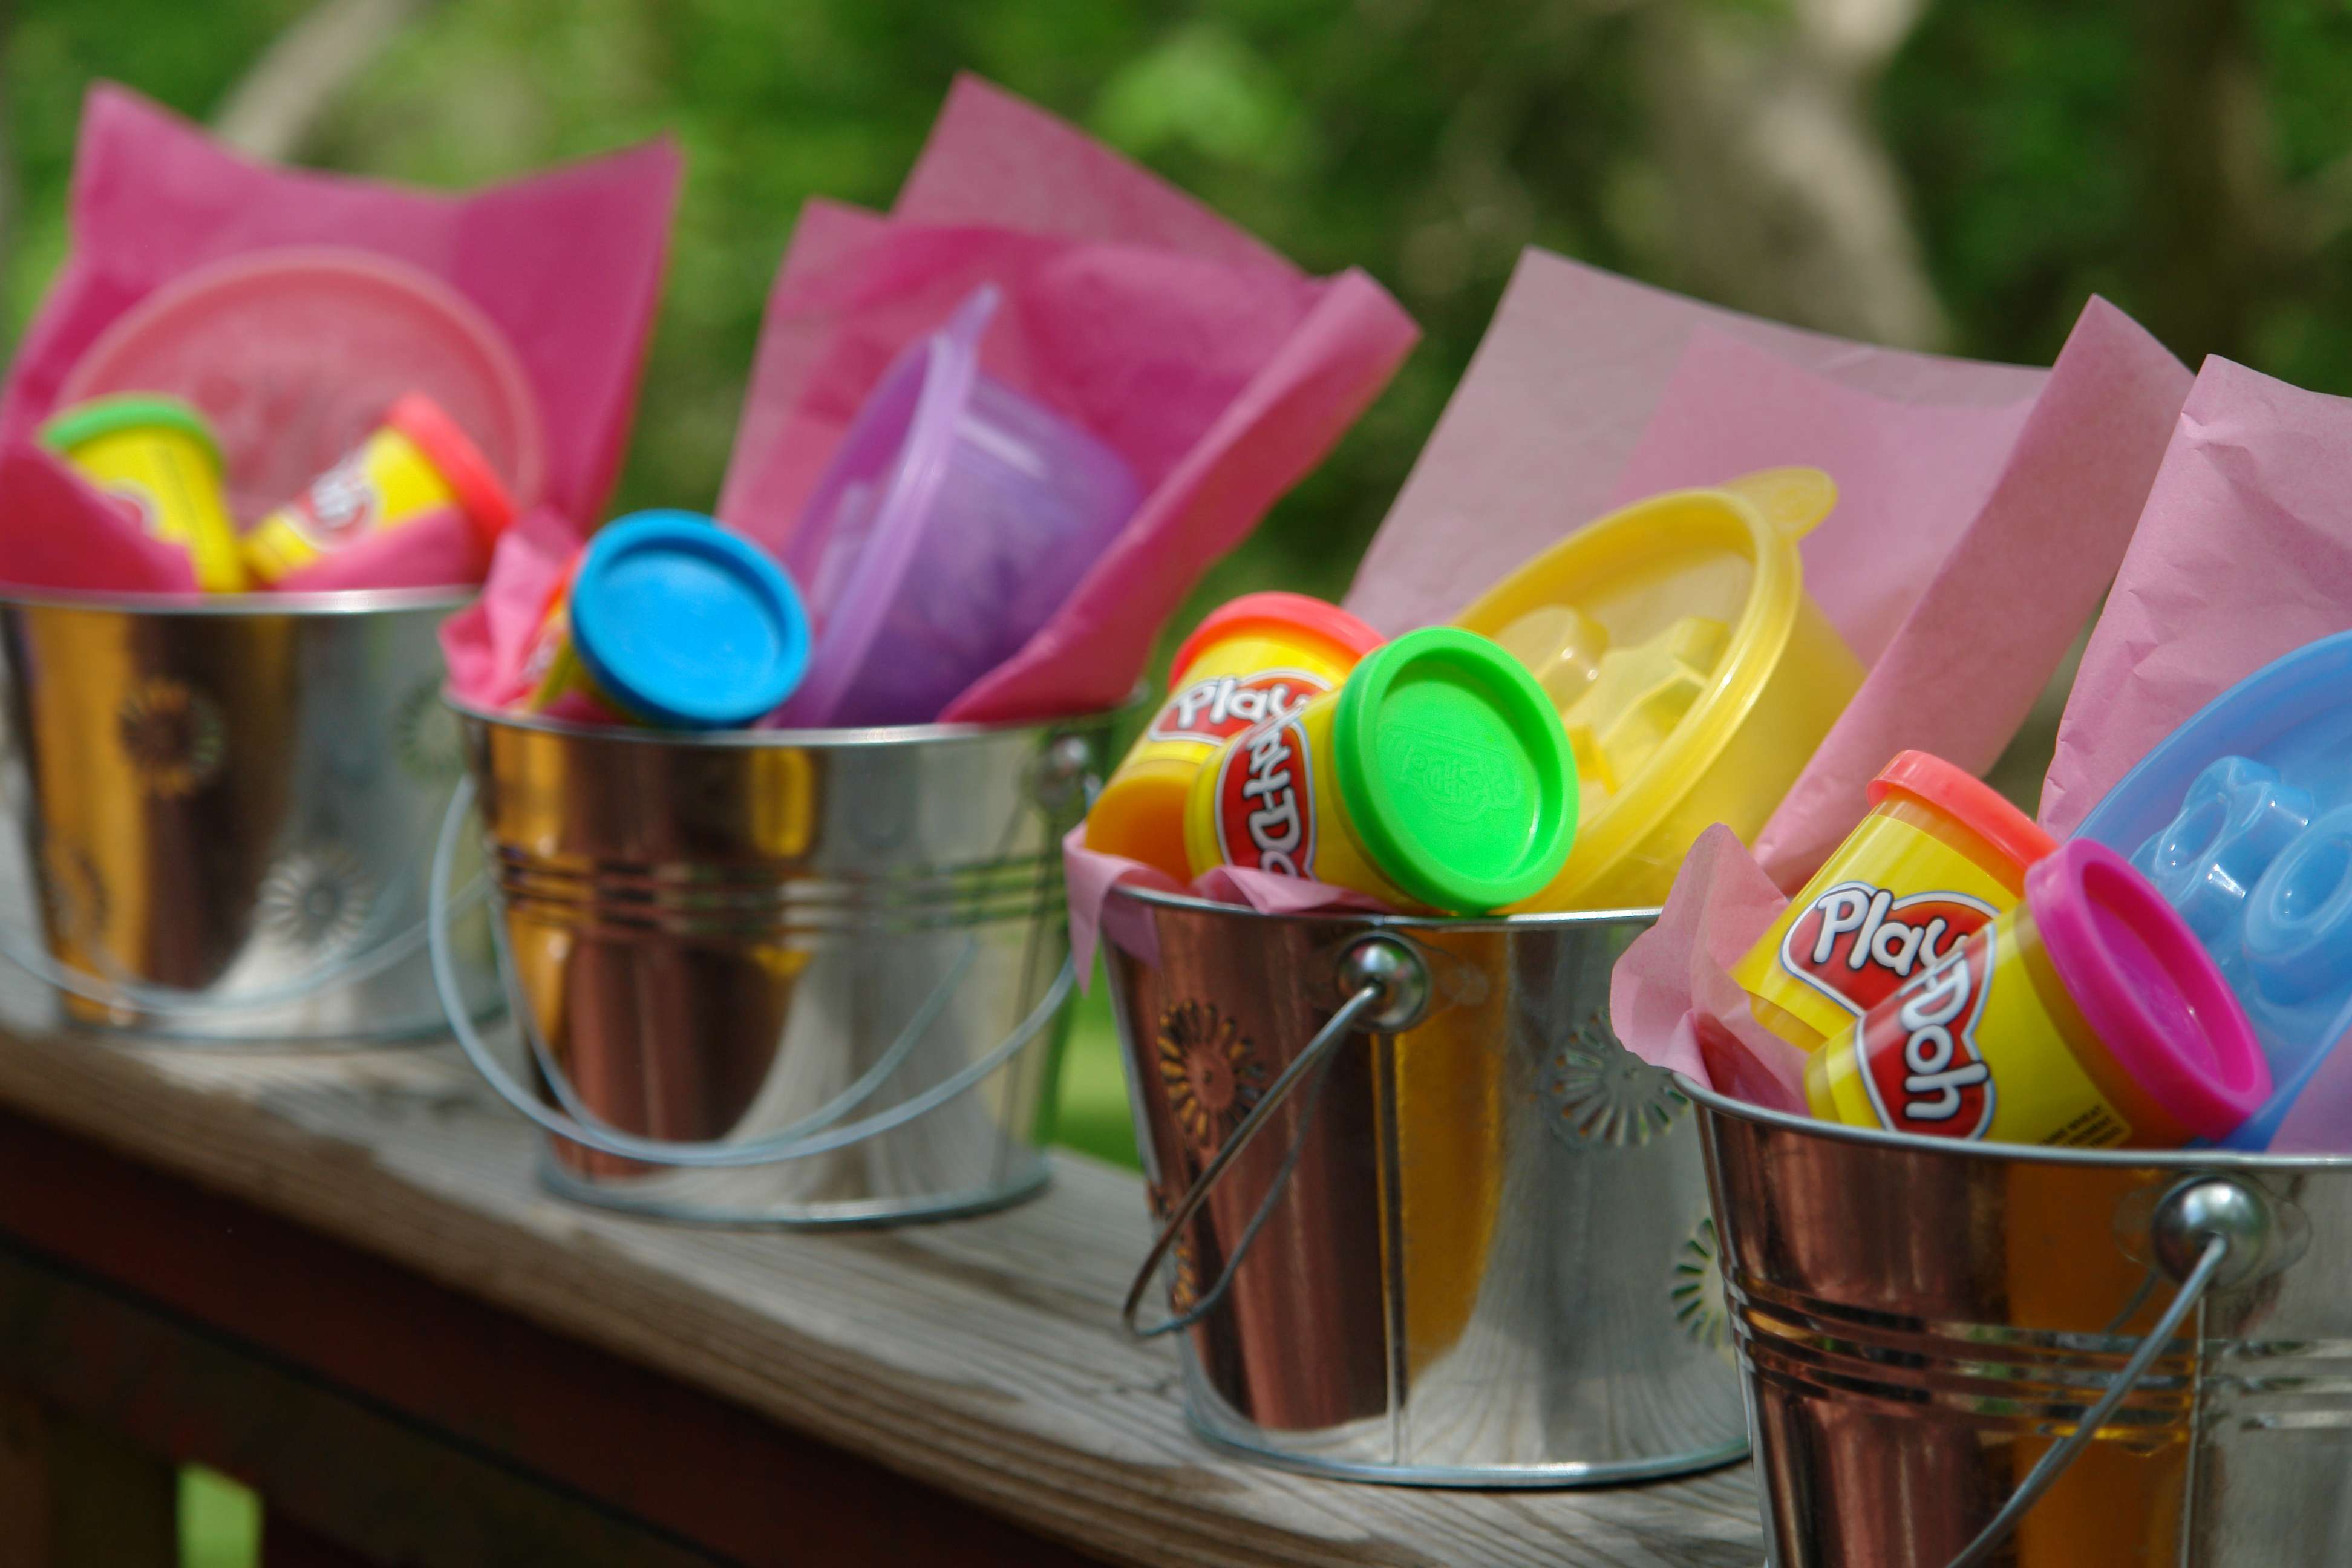 Play-dohs arranged uniquely in small bucket package as a child's birthday souvenir